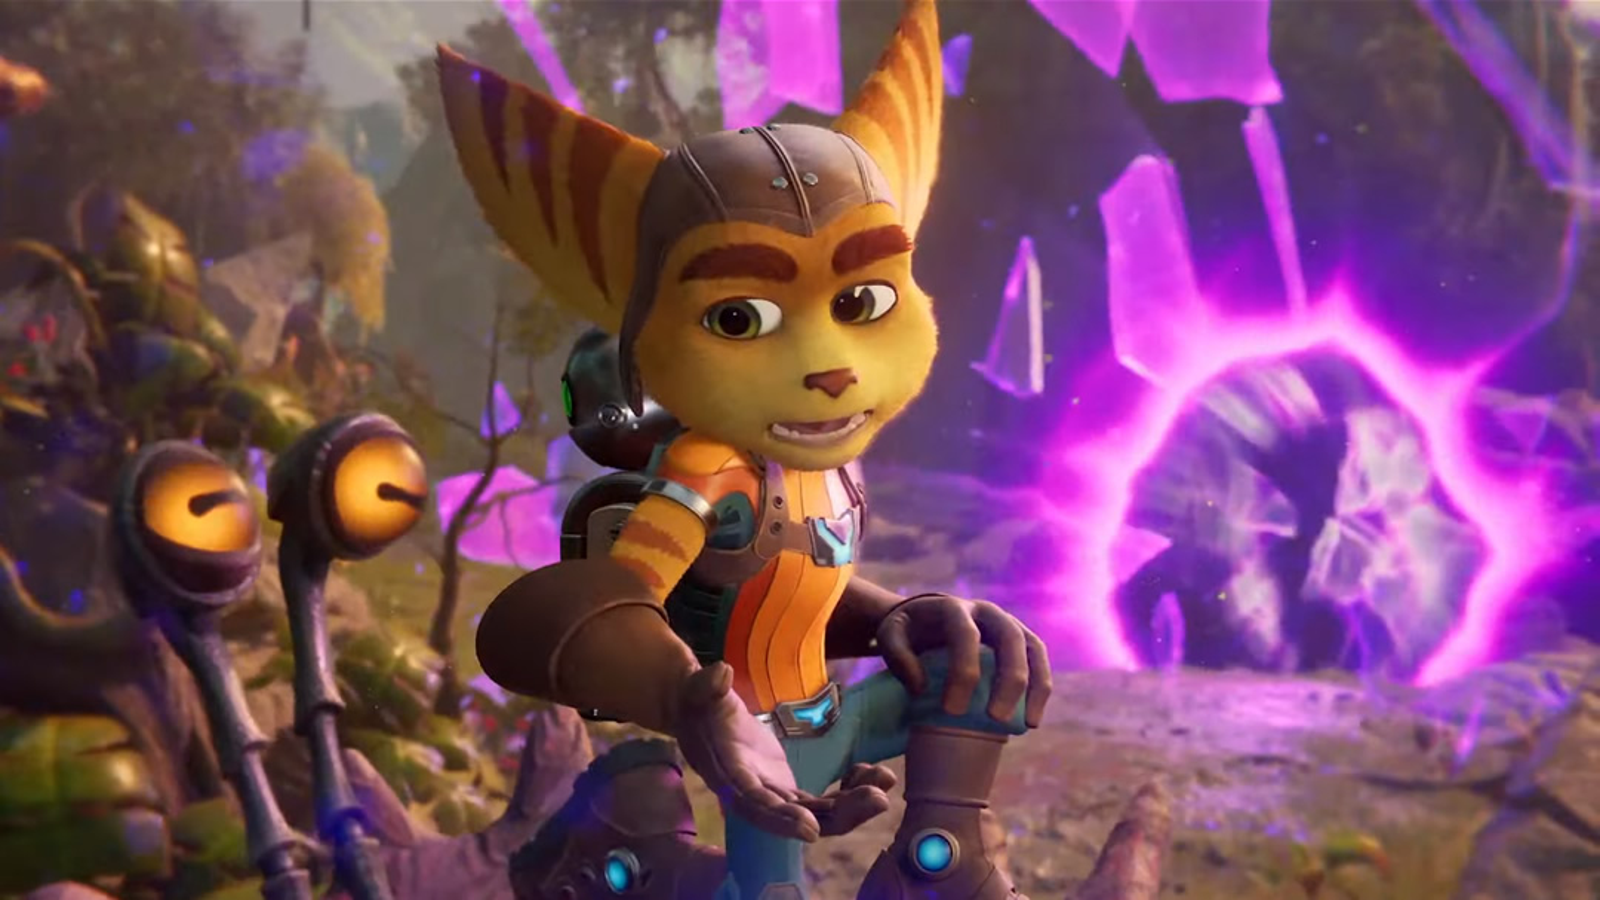 Ratchet & Clank - Rift Apart – Planets and Exploration - video